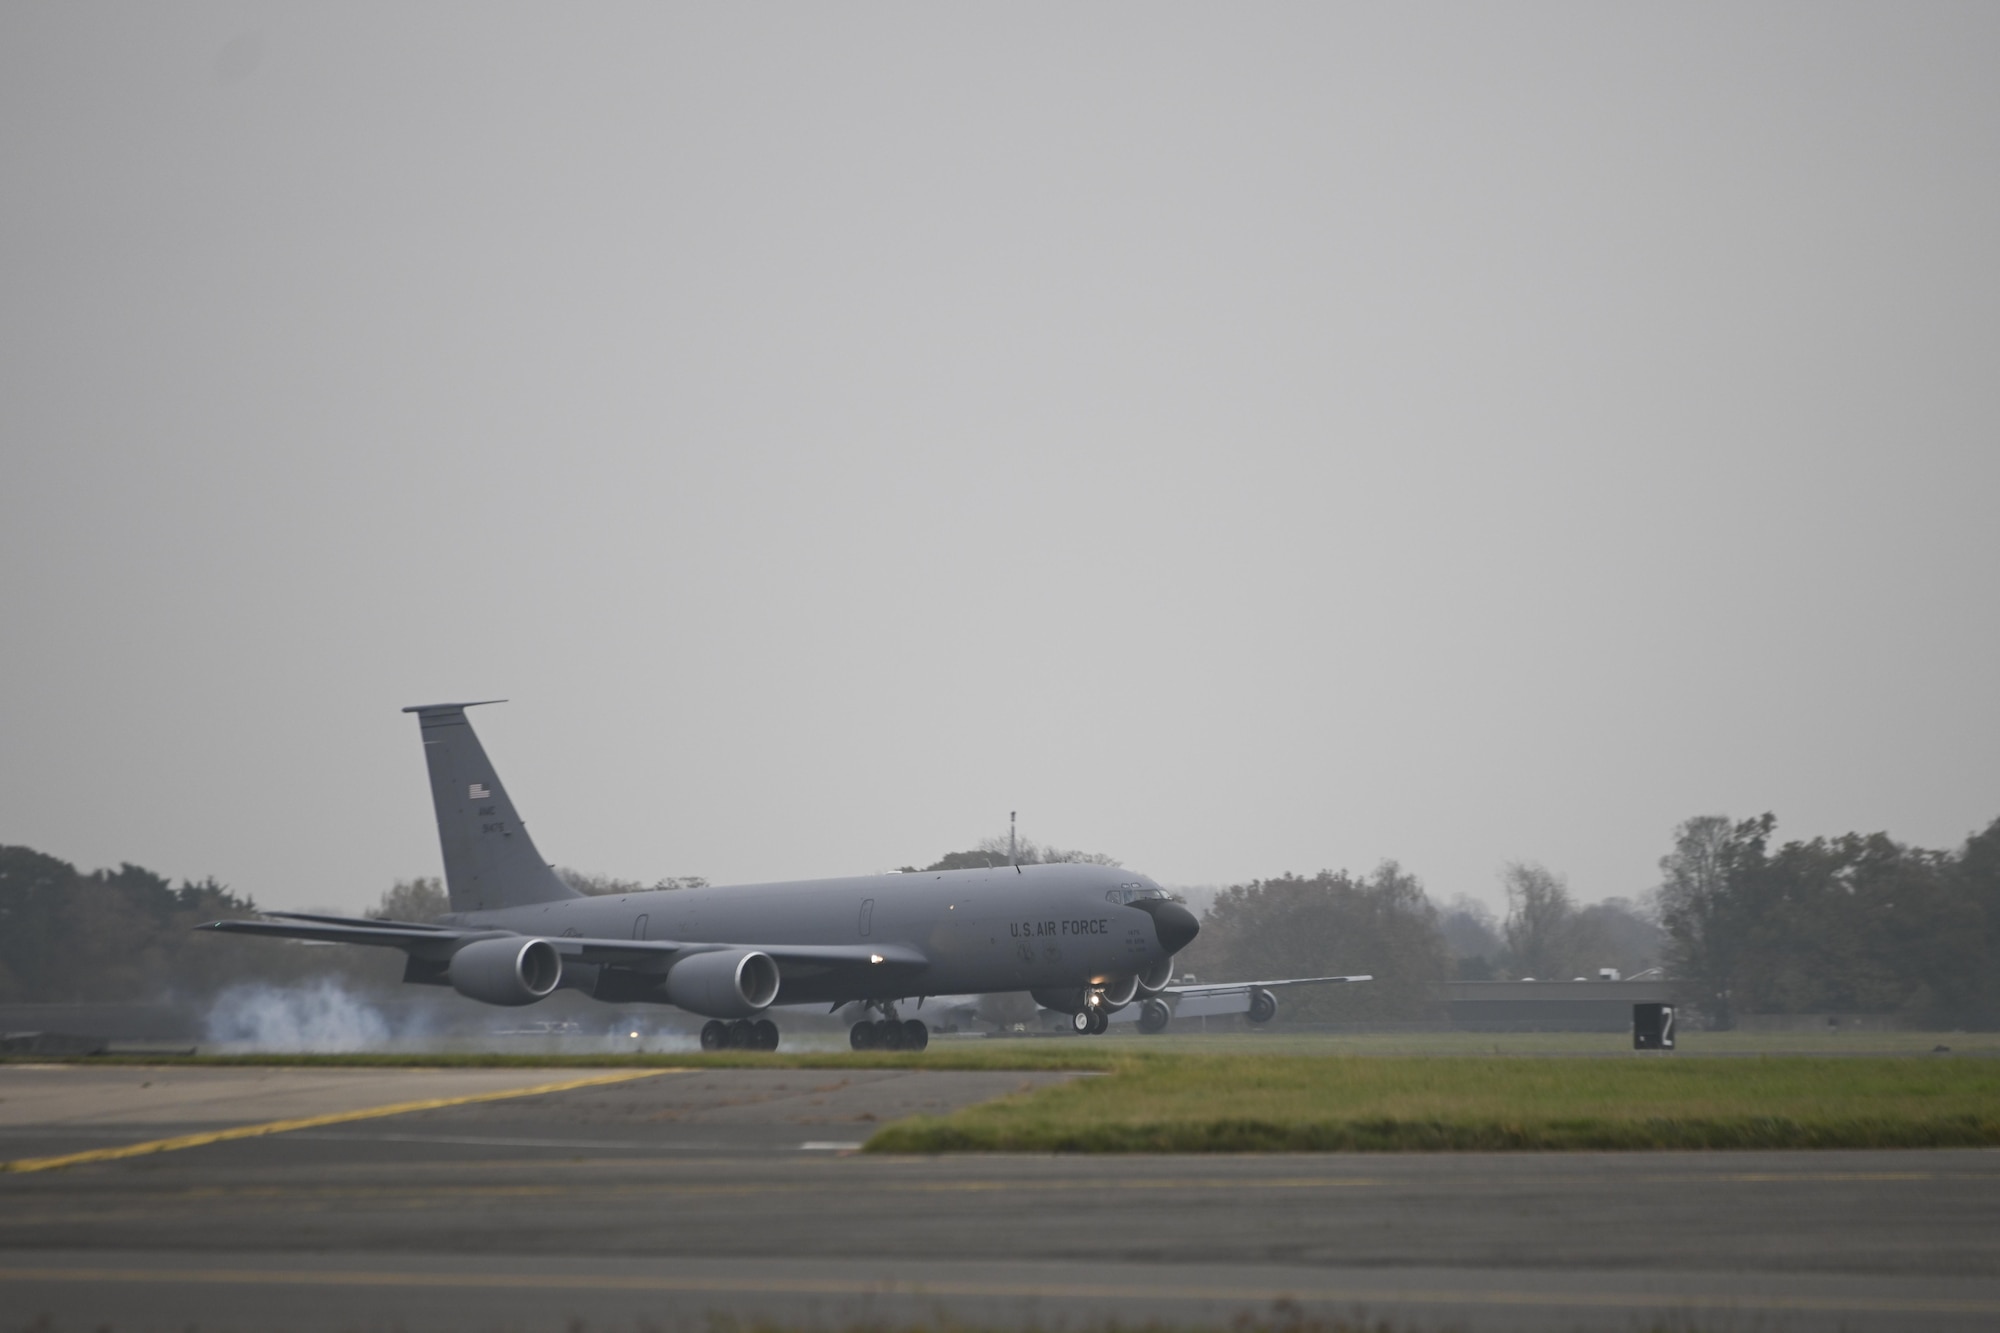 A U.S. Air Force KC-135 Stratotanker aircraft of variant Block 45 lands at Royal Air Force Mildenhall, England, Nov. 24, 2021. The 100th Air Refueling Wing is the last active-duty unit in the U.S. Air Force to receive the Block 45 variant of KC-135. (U.S. Air Force photo by Senior Airman Joseph Barron)